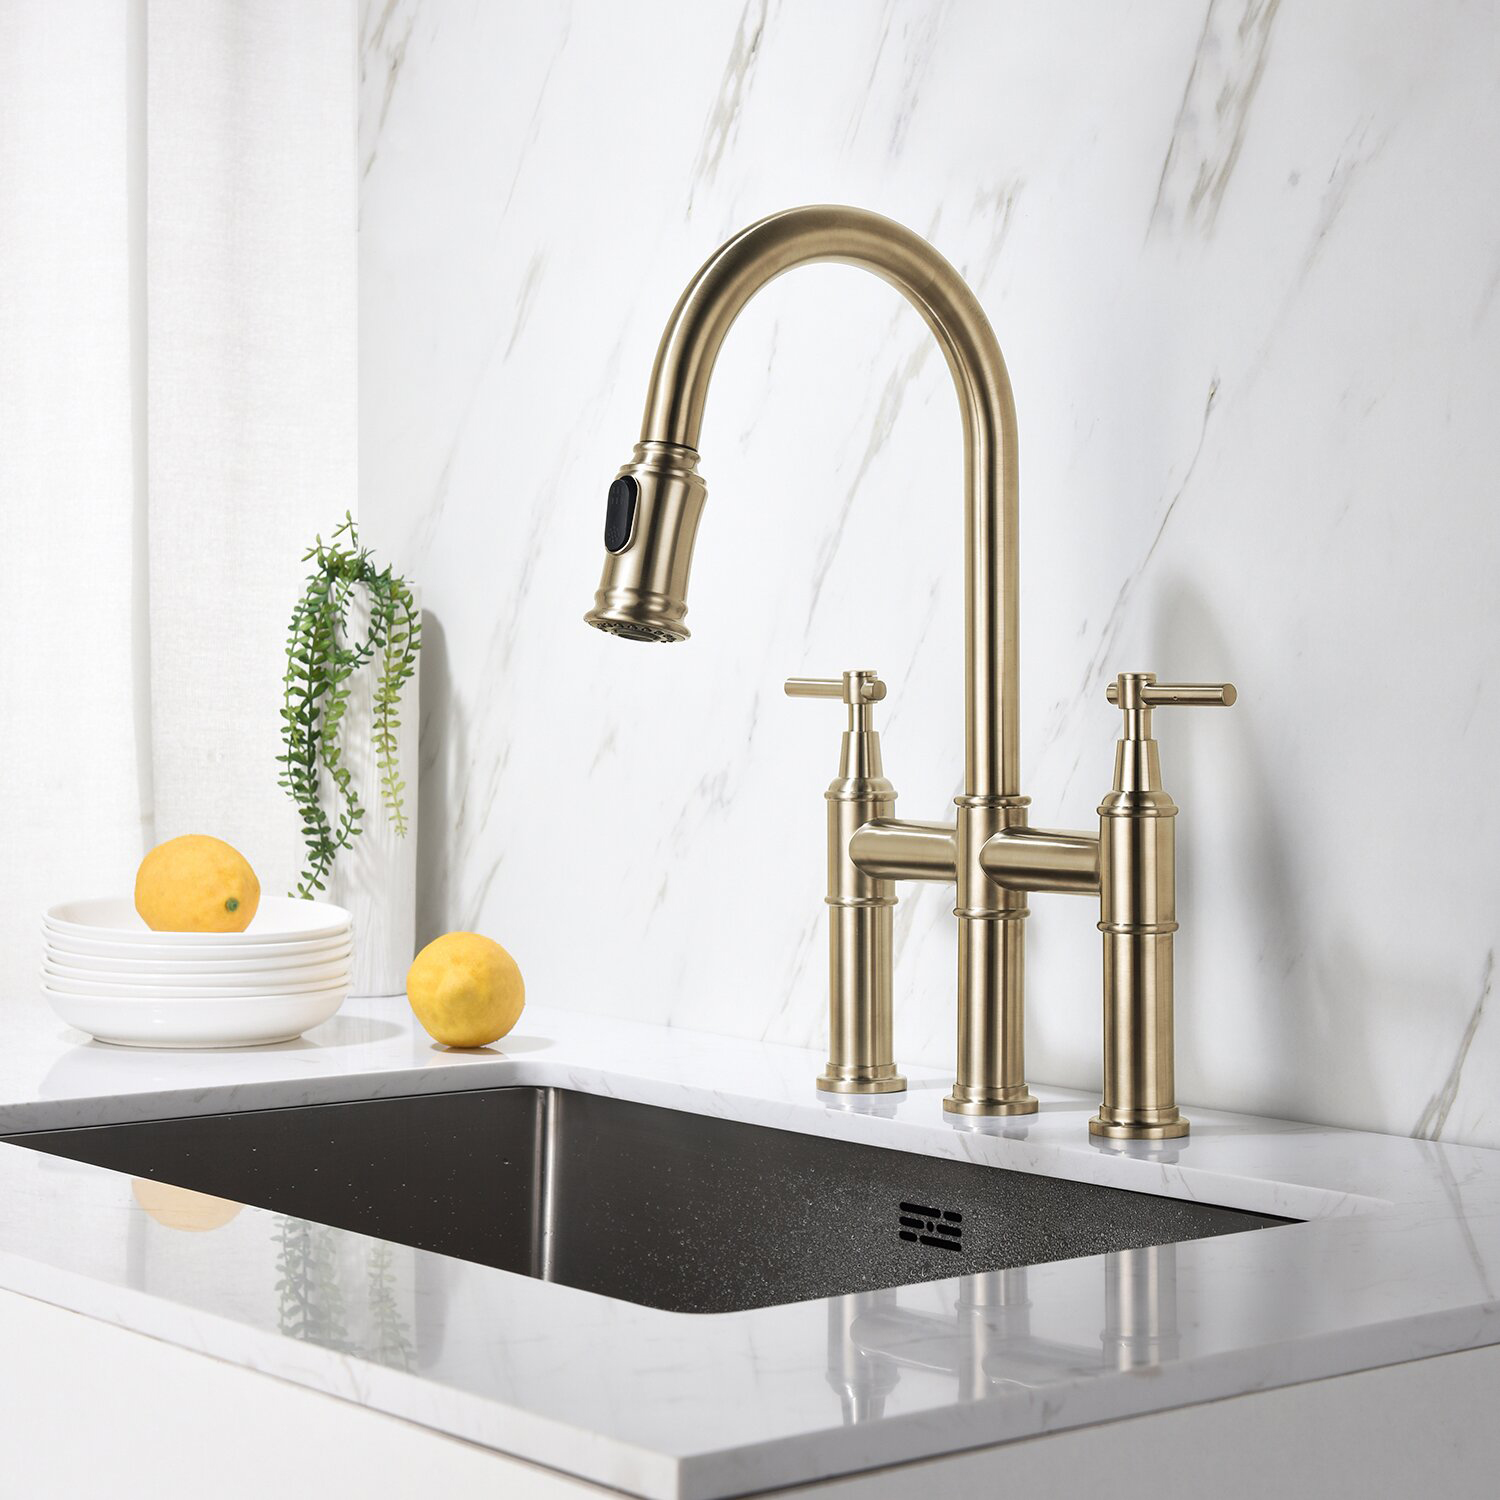 Aquacubic cUPC Brushed Gold Bridge Kitchen Faucet with Pull Down Sprayer 3 Hole Spot-Resistant Lead-Free Brass Kitchen Faucet 